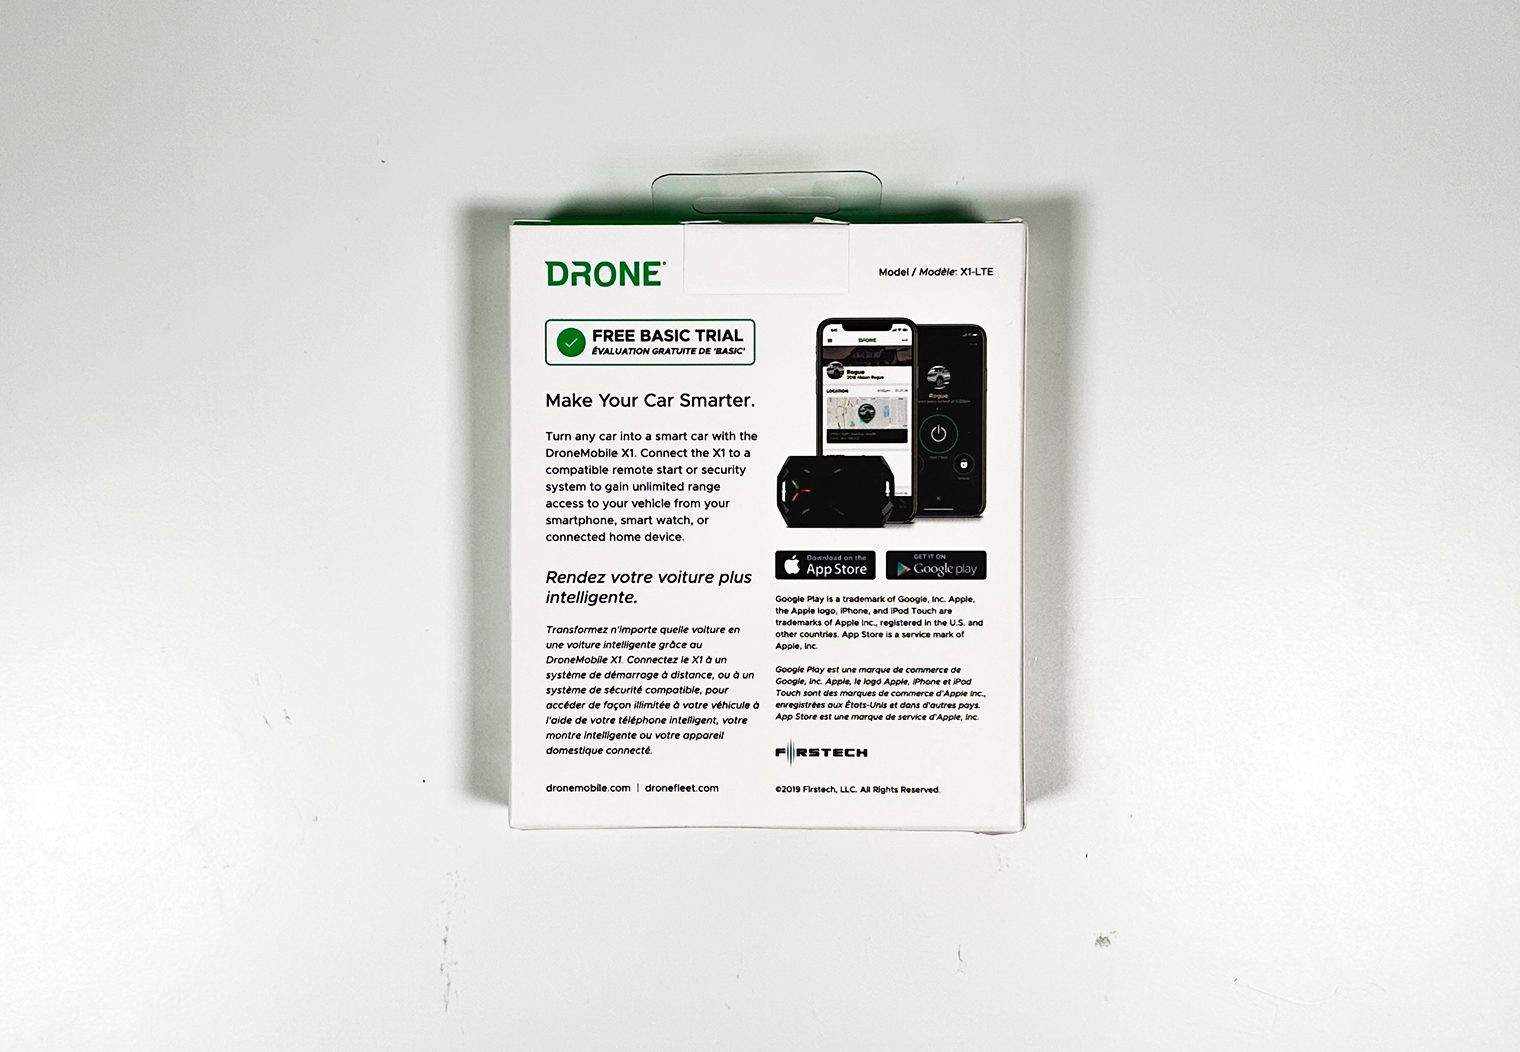 Drone X1 back of box